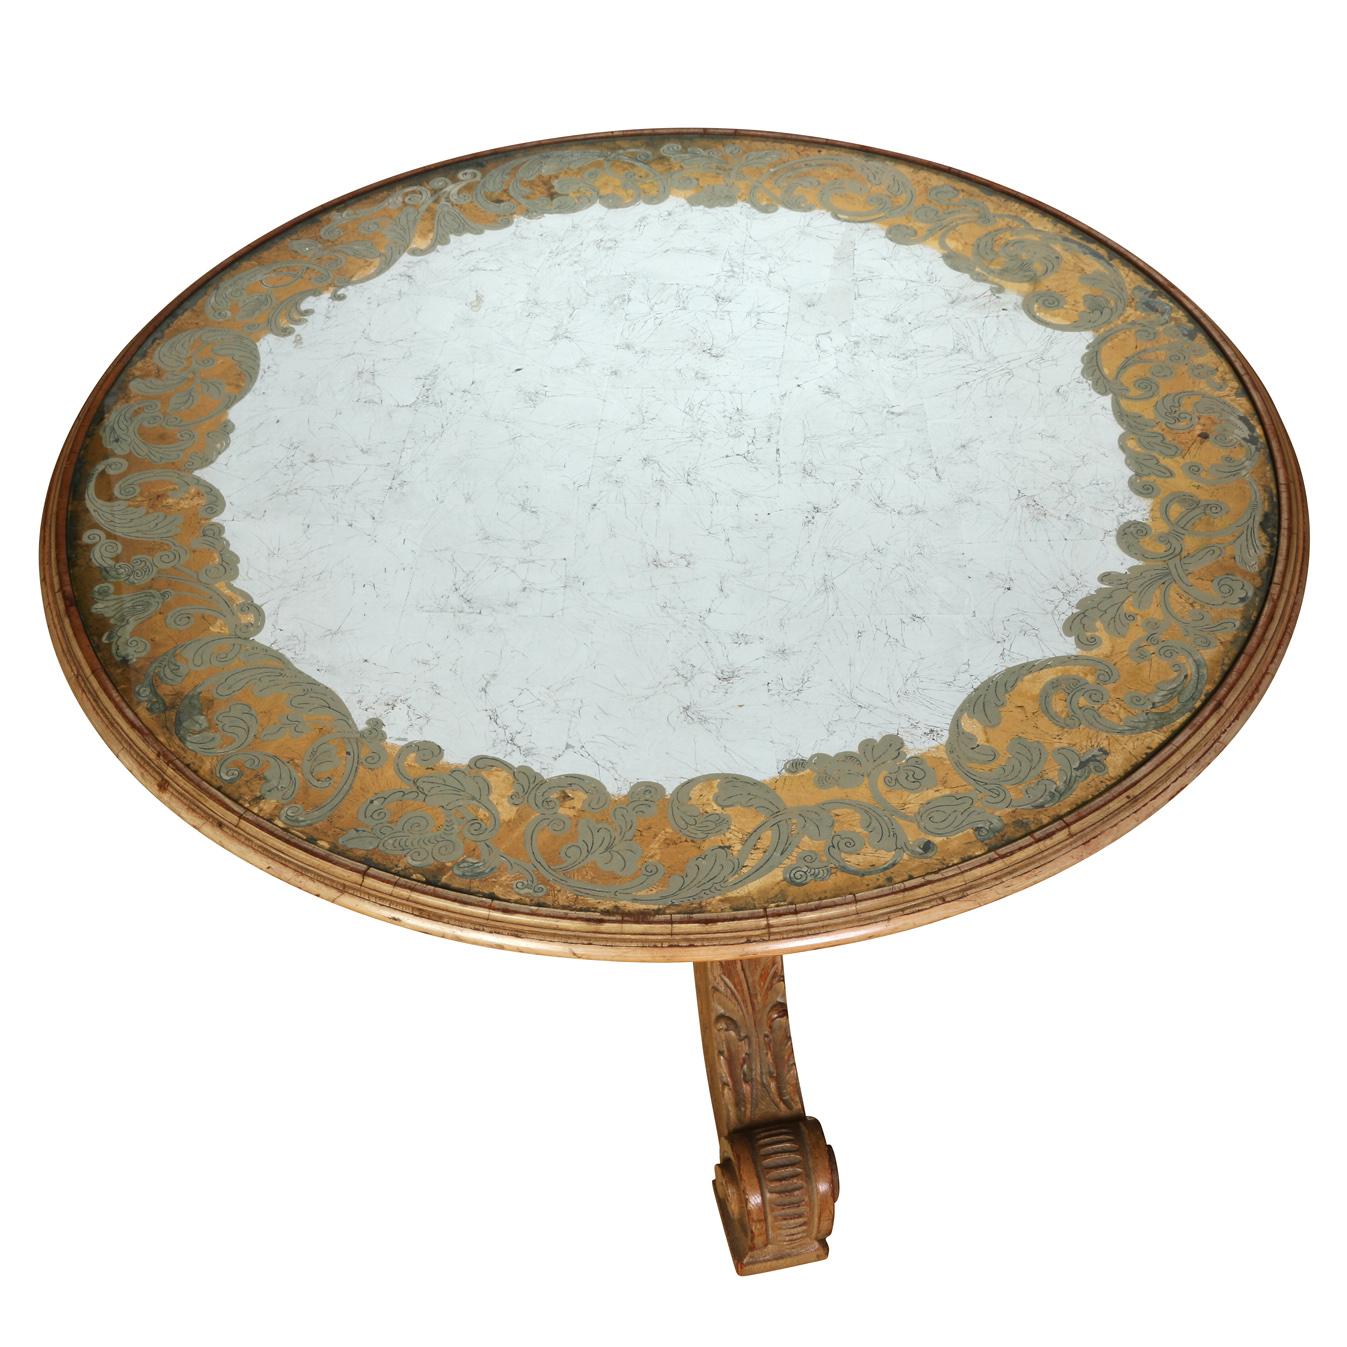 A Regence style round cocktail table with decorated eglomise mirror inset top and three leg base with carved and scrolled legs